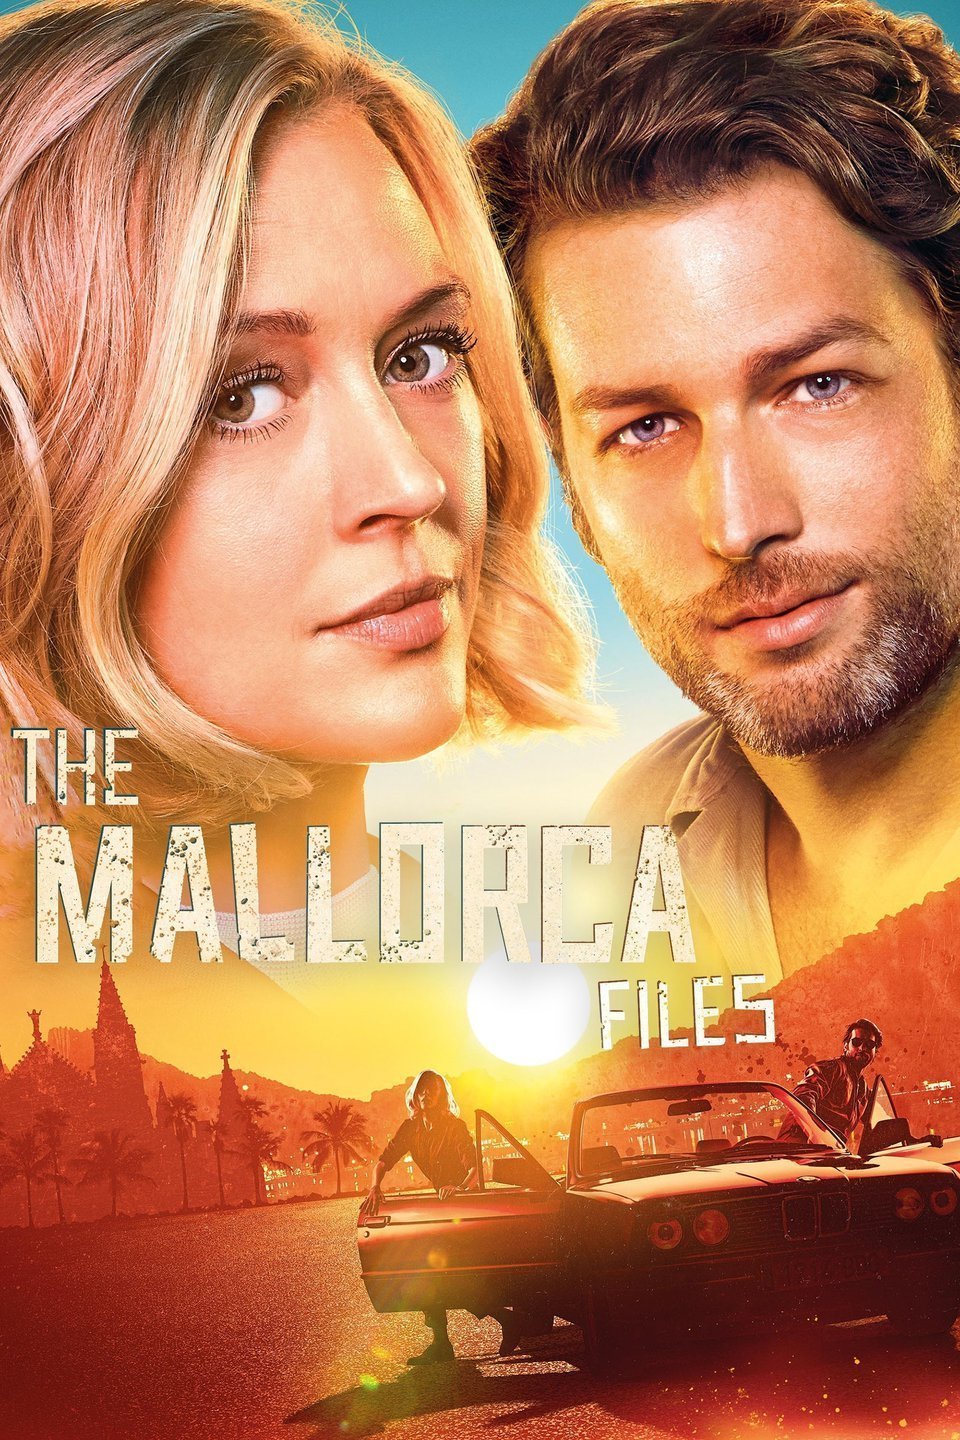 Poster of the movie The Mallorca Files